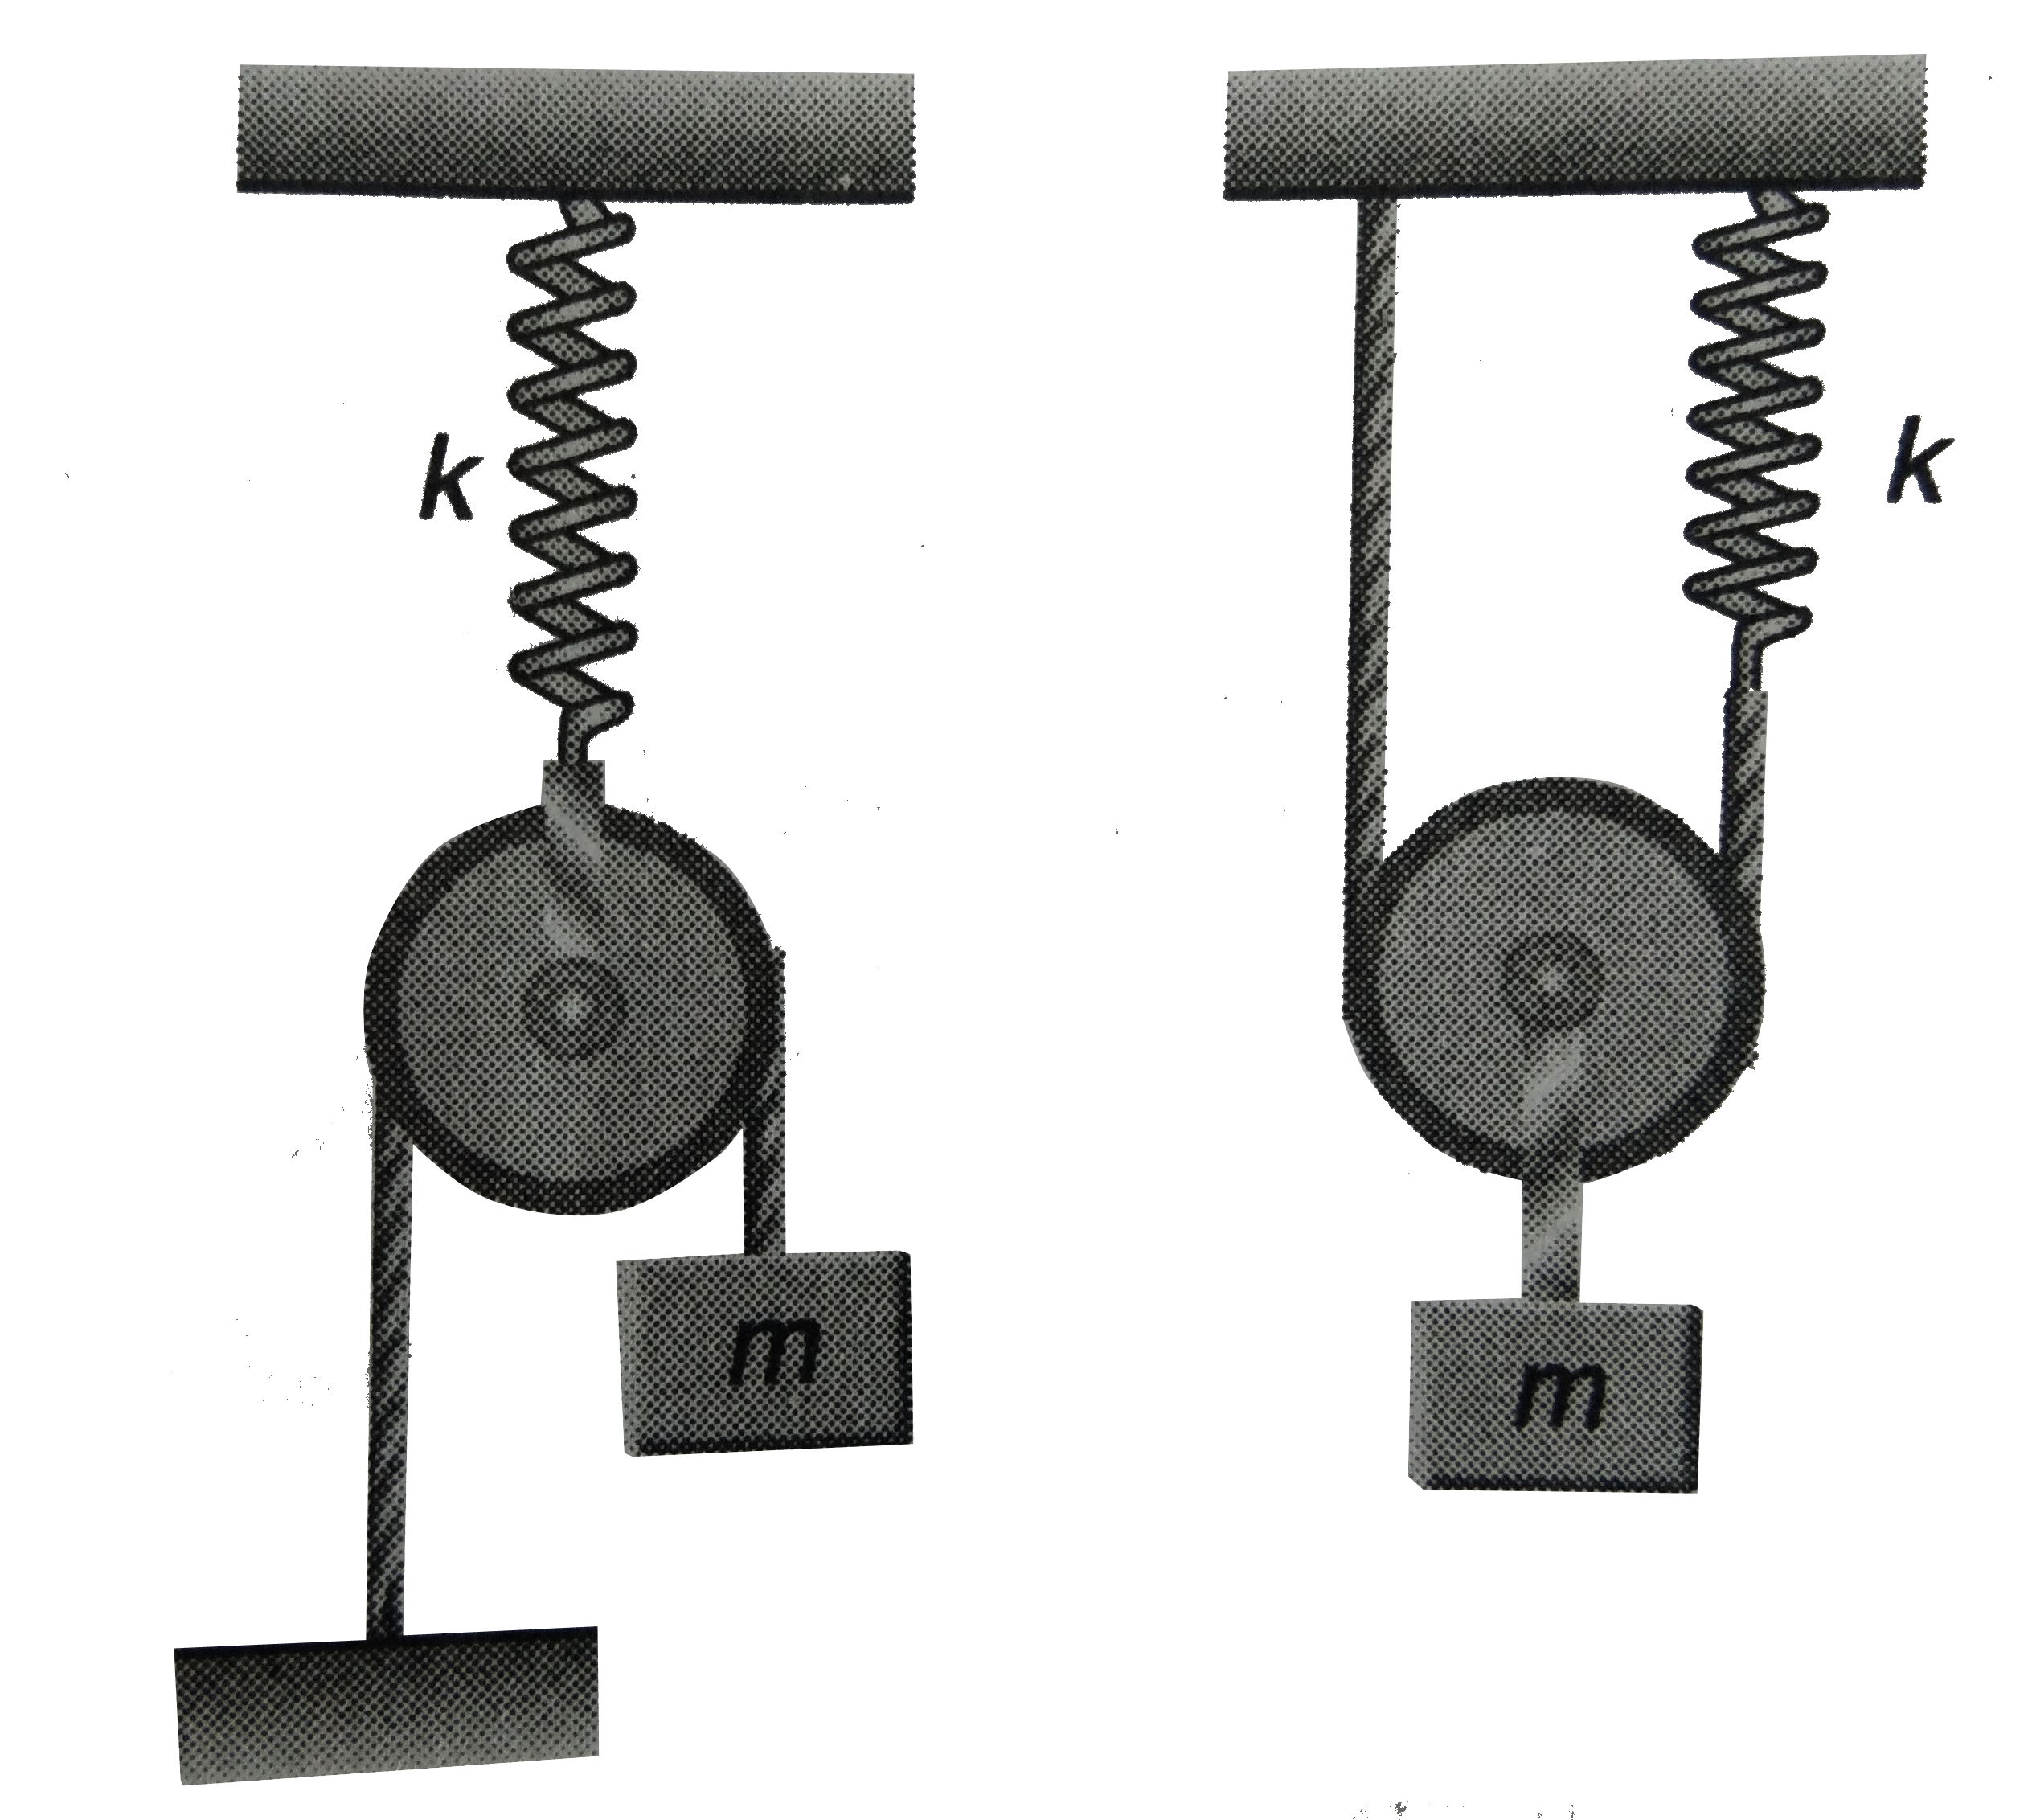 Figure shows a system consisting of a massles pulley, a spring of force constant k and a block of  mass m. If the block is sligthtly displaced vertically down from its equilibrium and released, find the period of its vertical oscillation in cases (a) and (b).